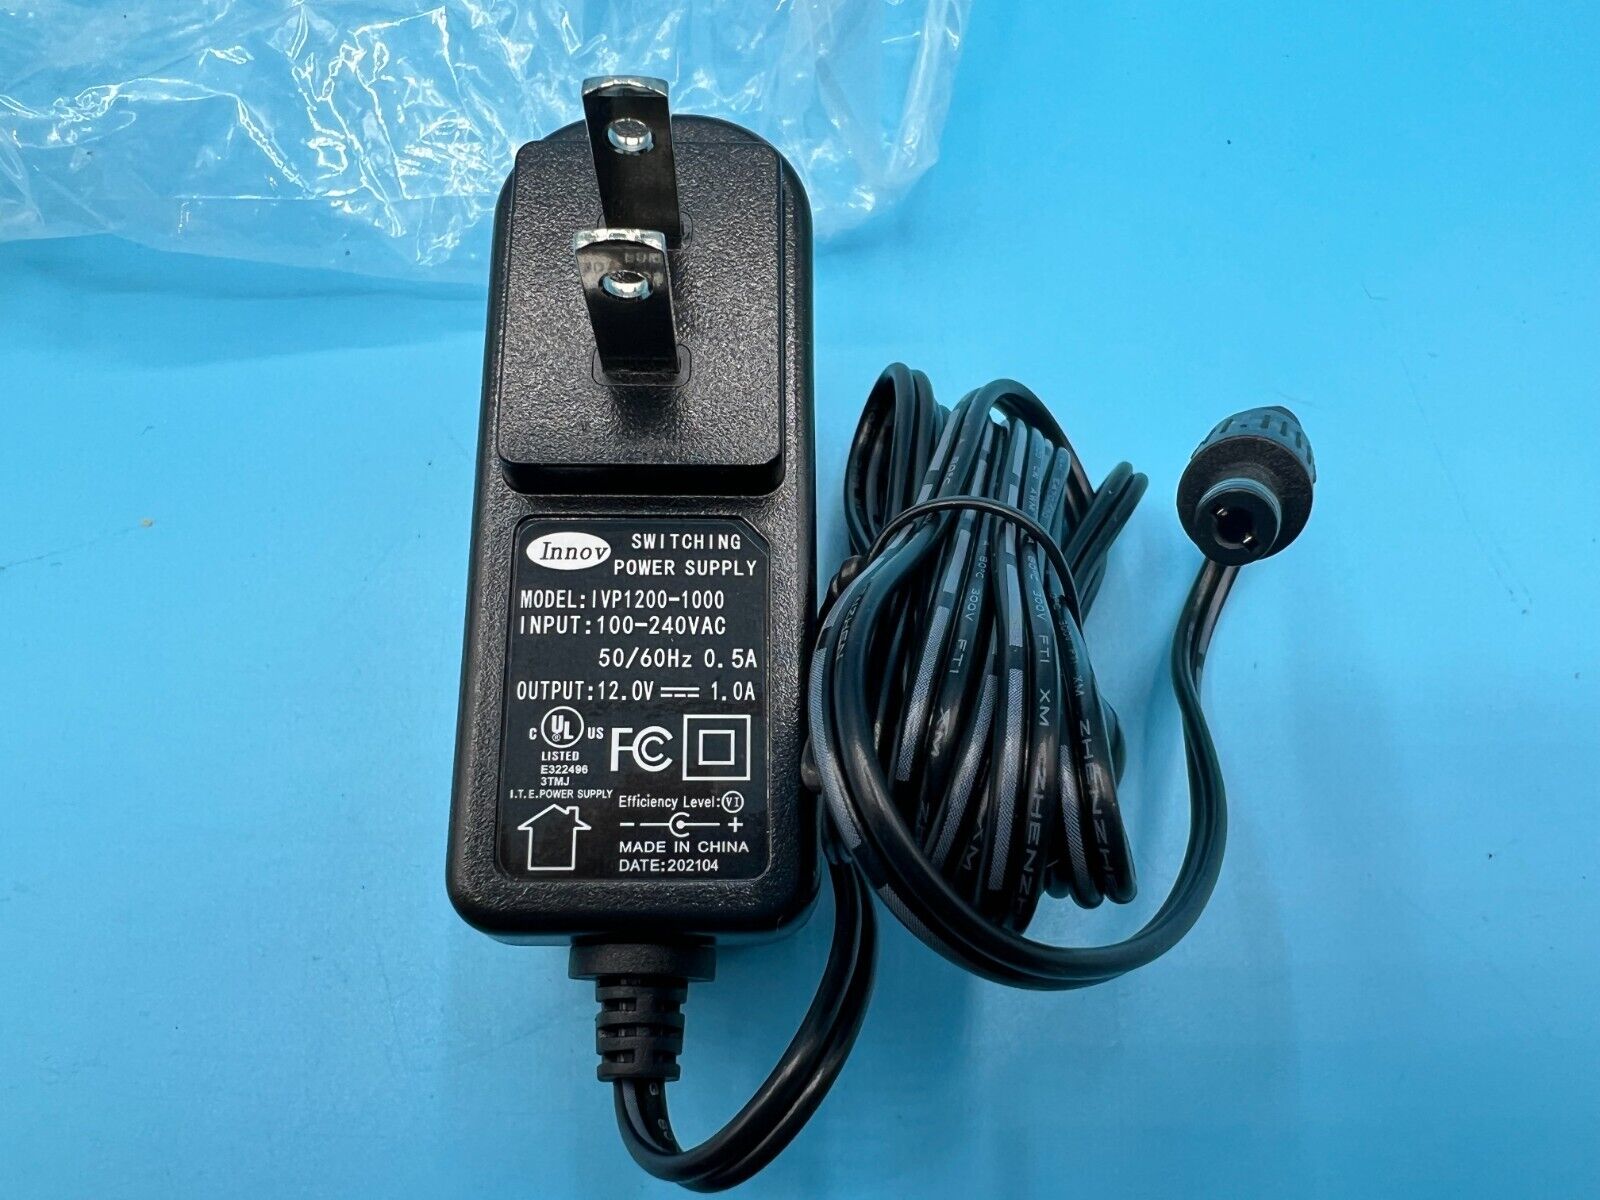 AC/DC Adapter Charger for Innov IVP1200-1000 IVP12001000 Power Supply Cord Type: AC/DC Adapter Features: 6foot Cord